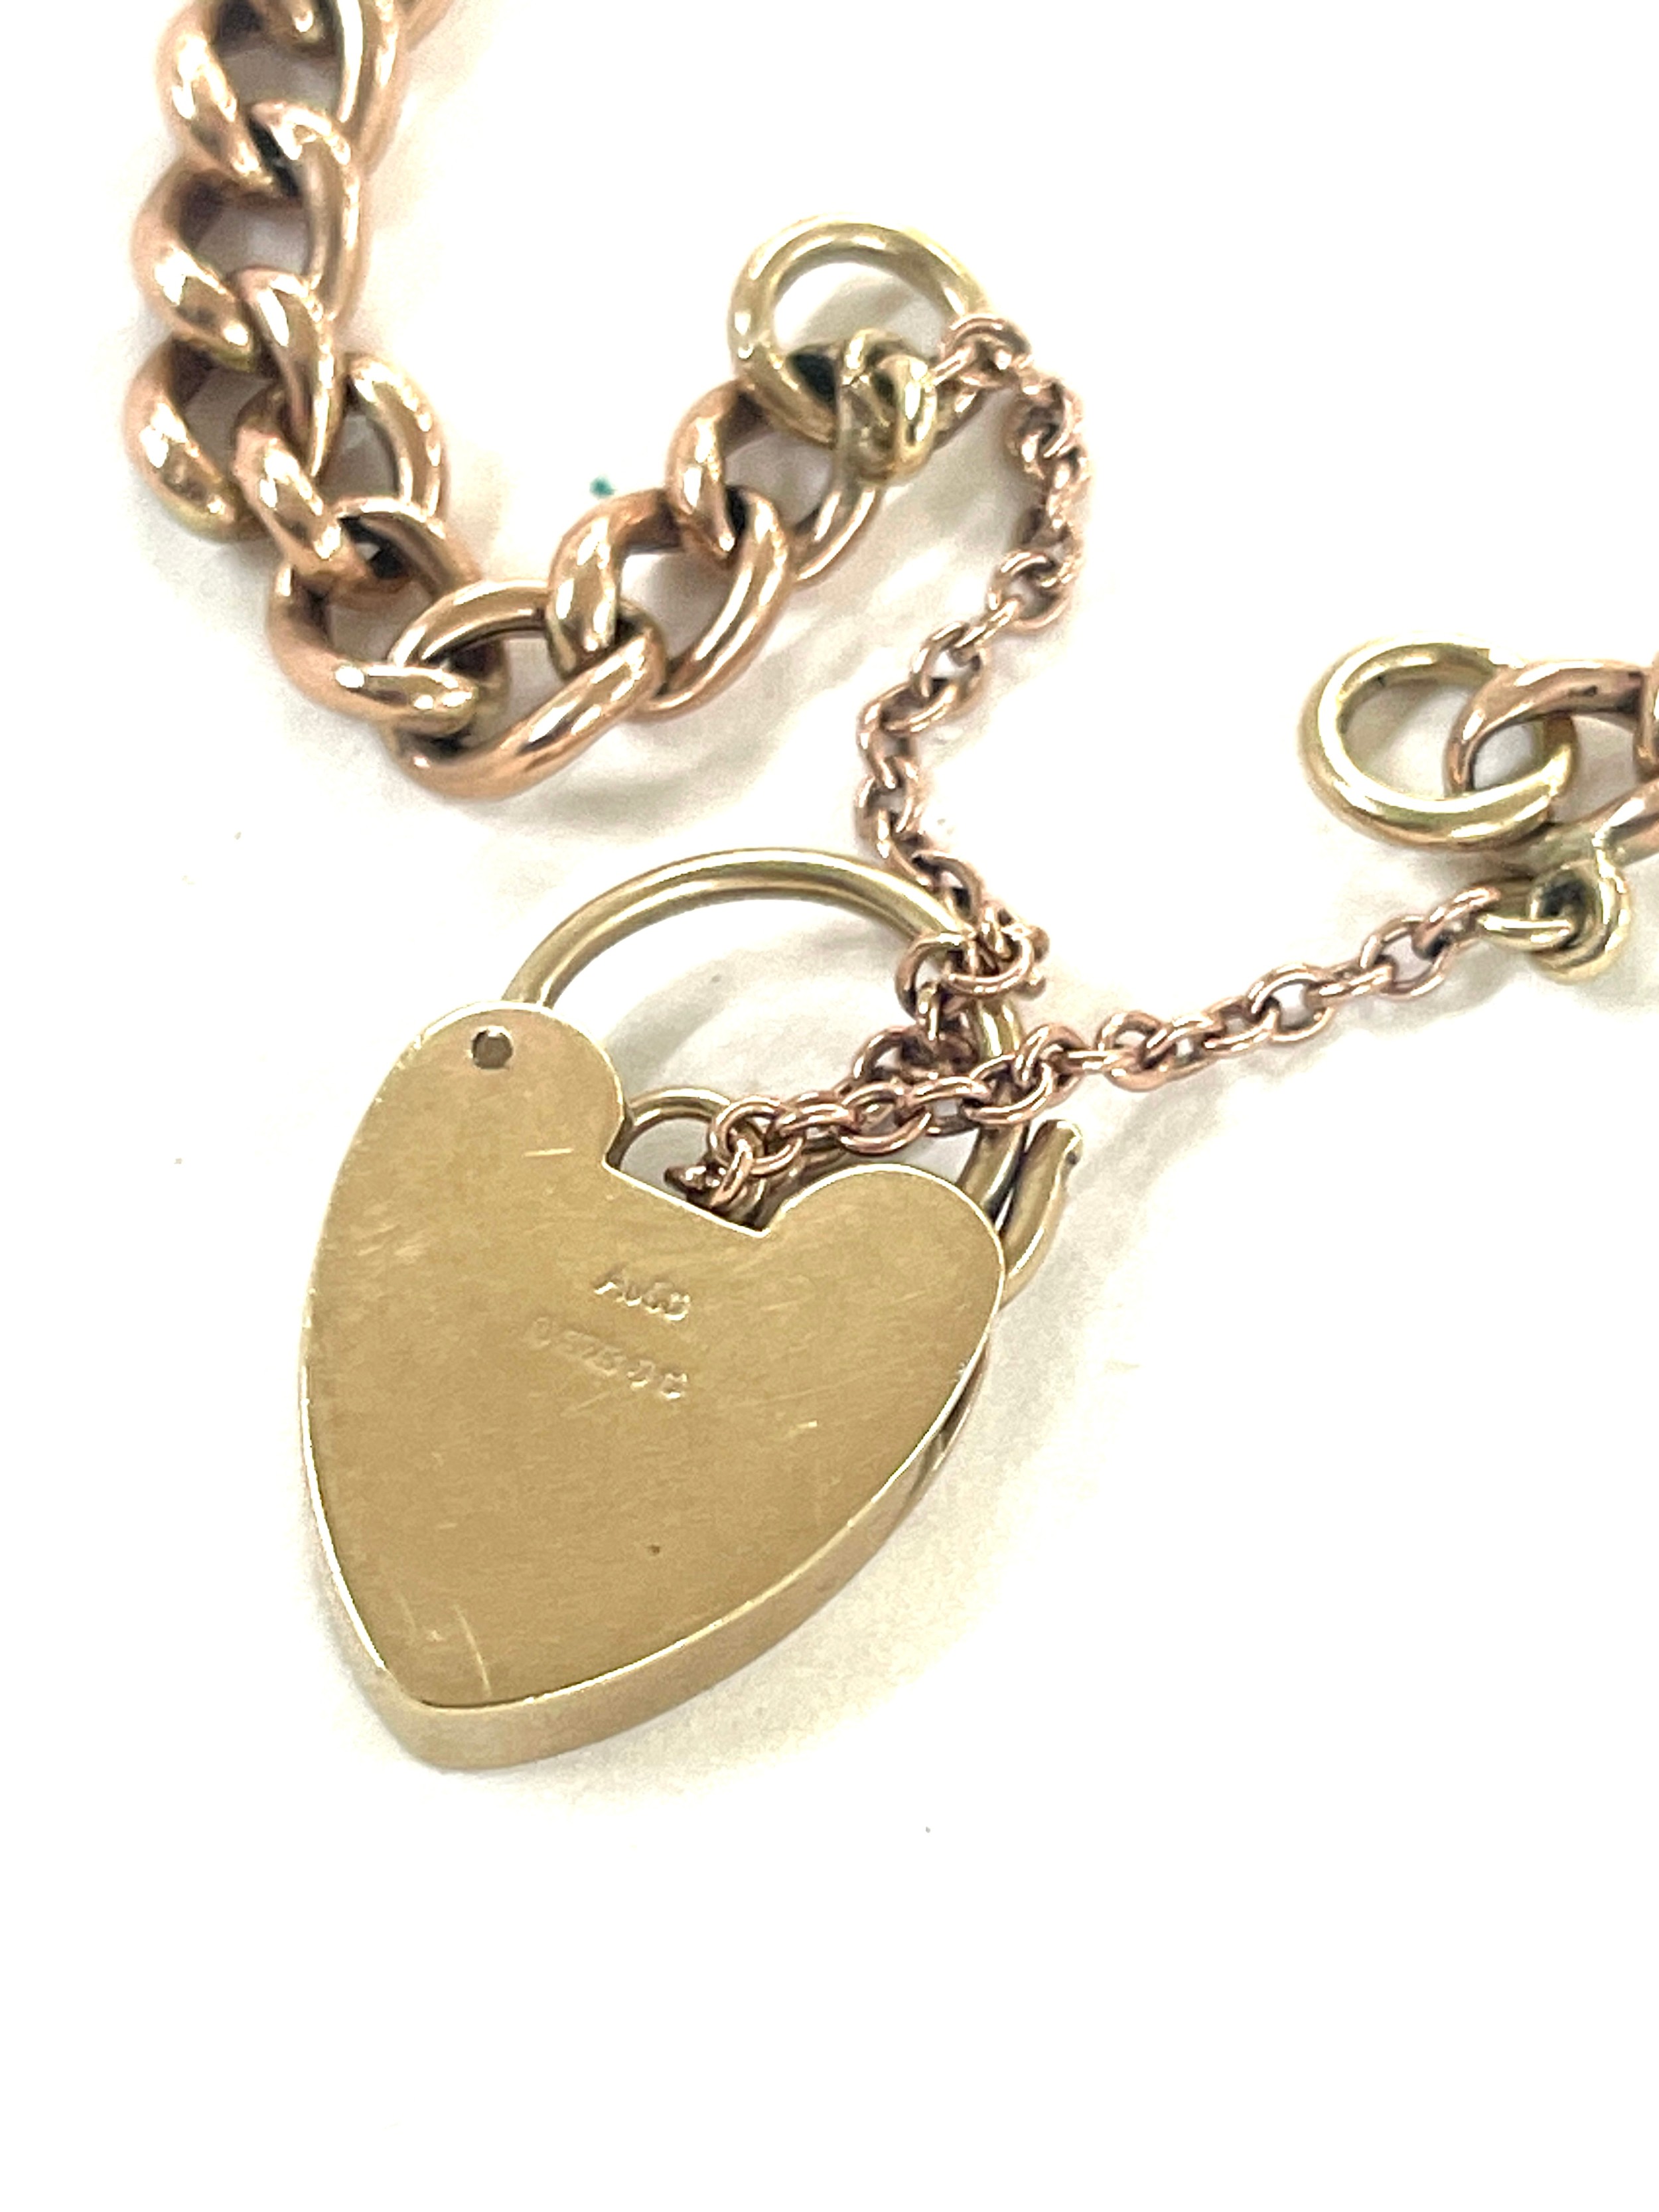 A gold chain with a heart shape locket 9 carat- weighs approx 9.6 grams